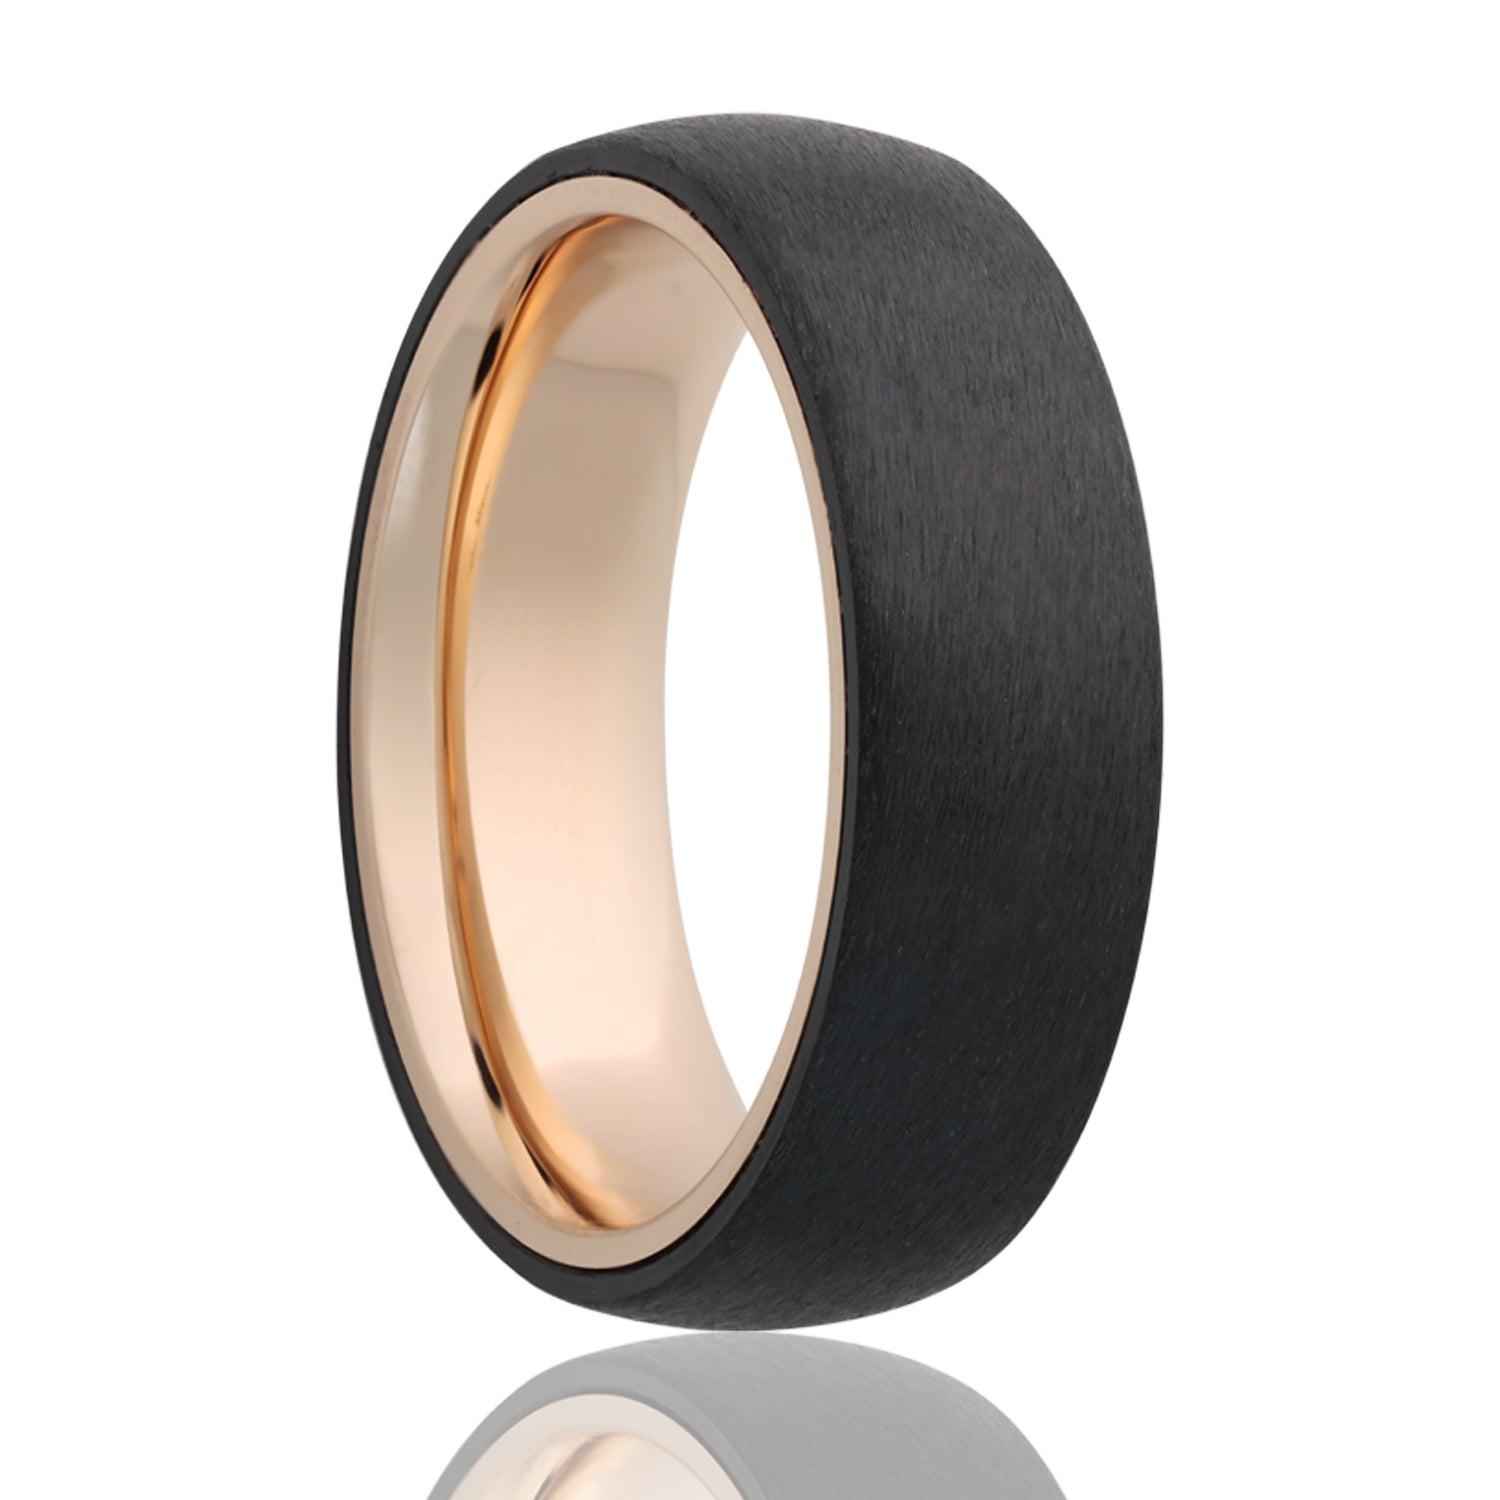 A satin finish wedding band displayed on a neutral white background.